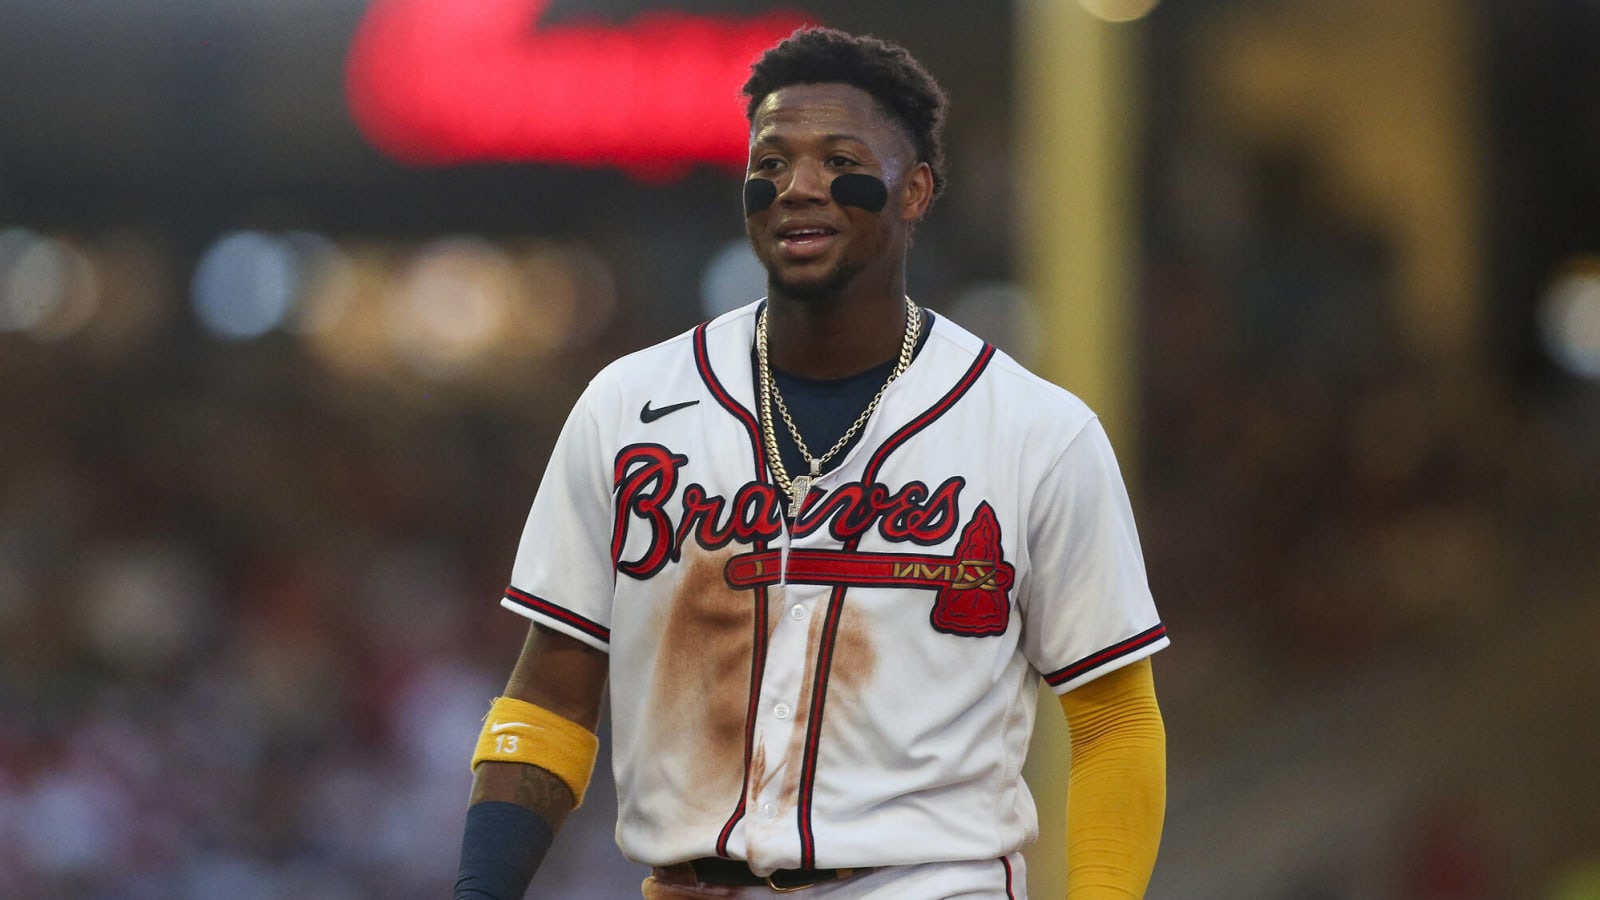 Ronald Acuna Jr. returns to Braves lineup after four-game absence